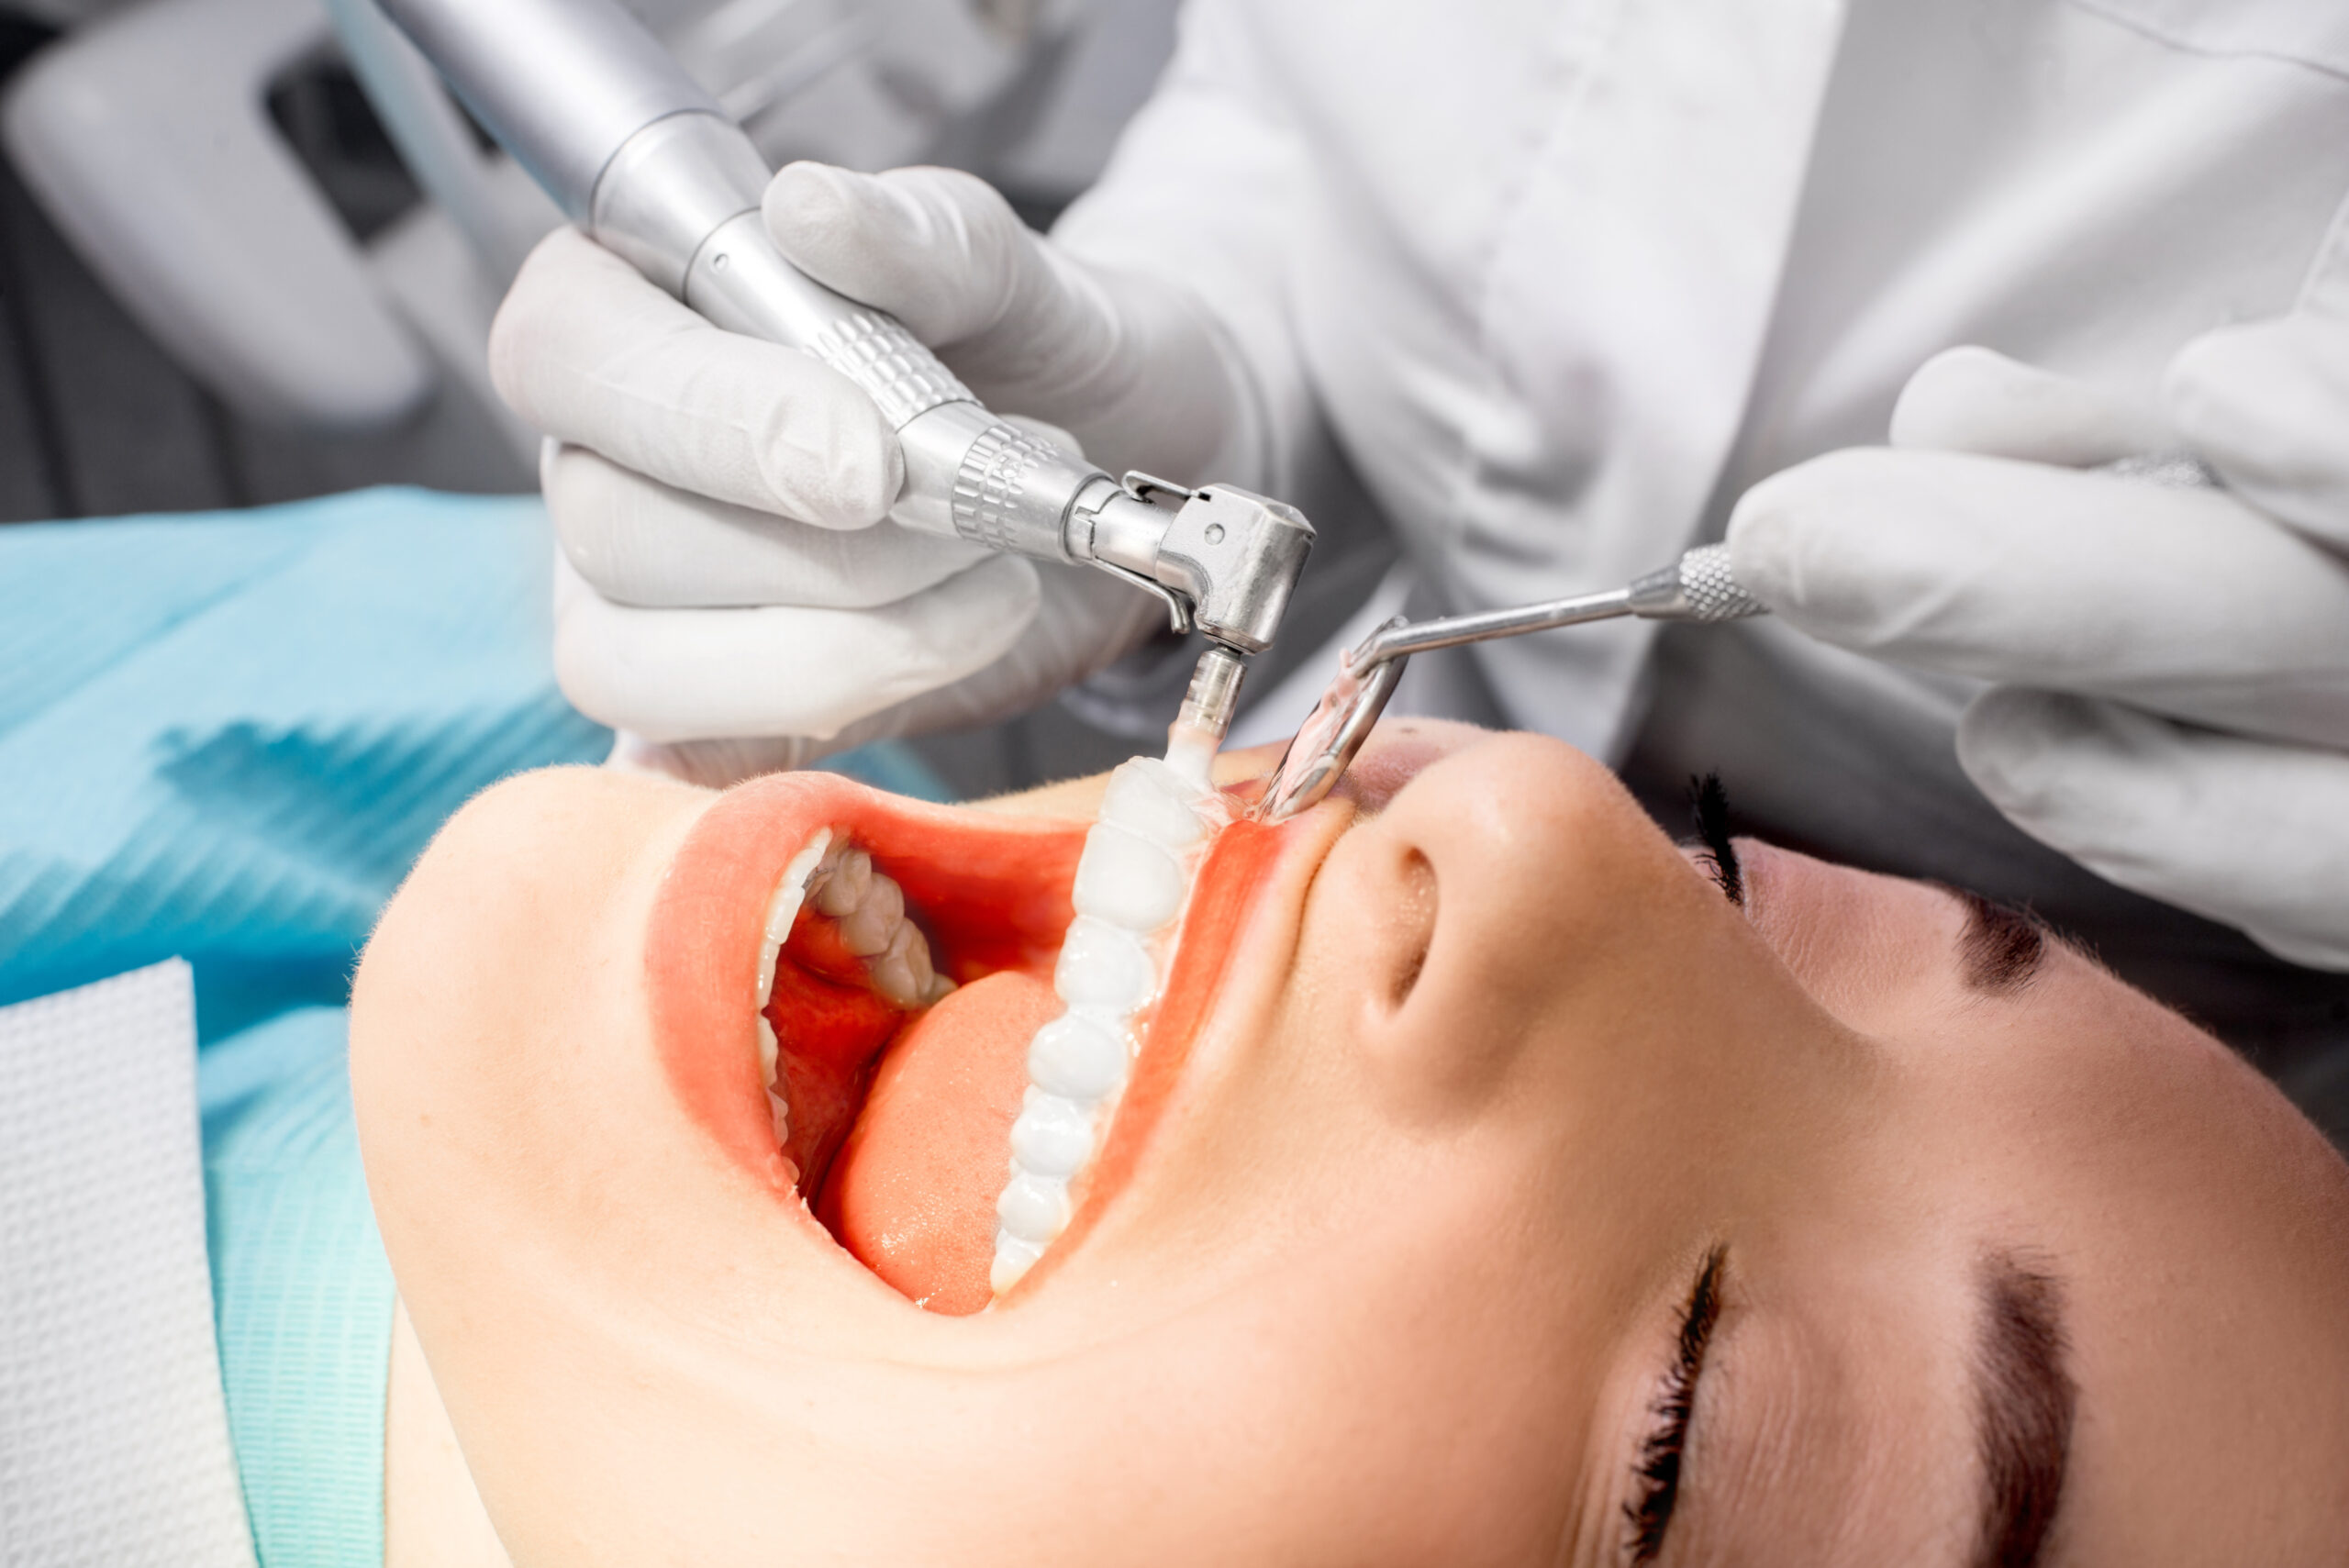 “Finding Same Day Emergency Dentist Services in Houston, TX”